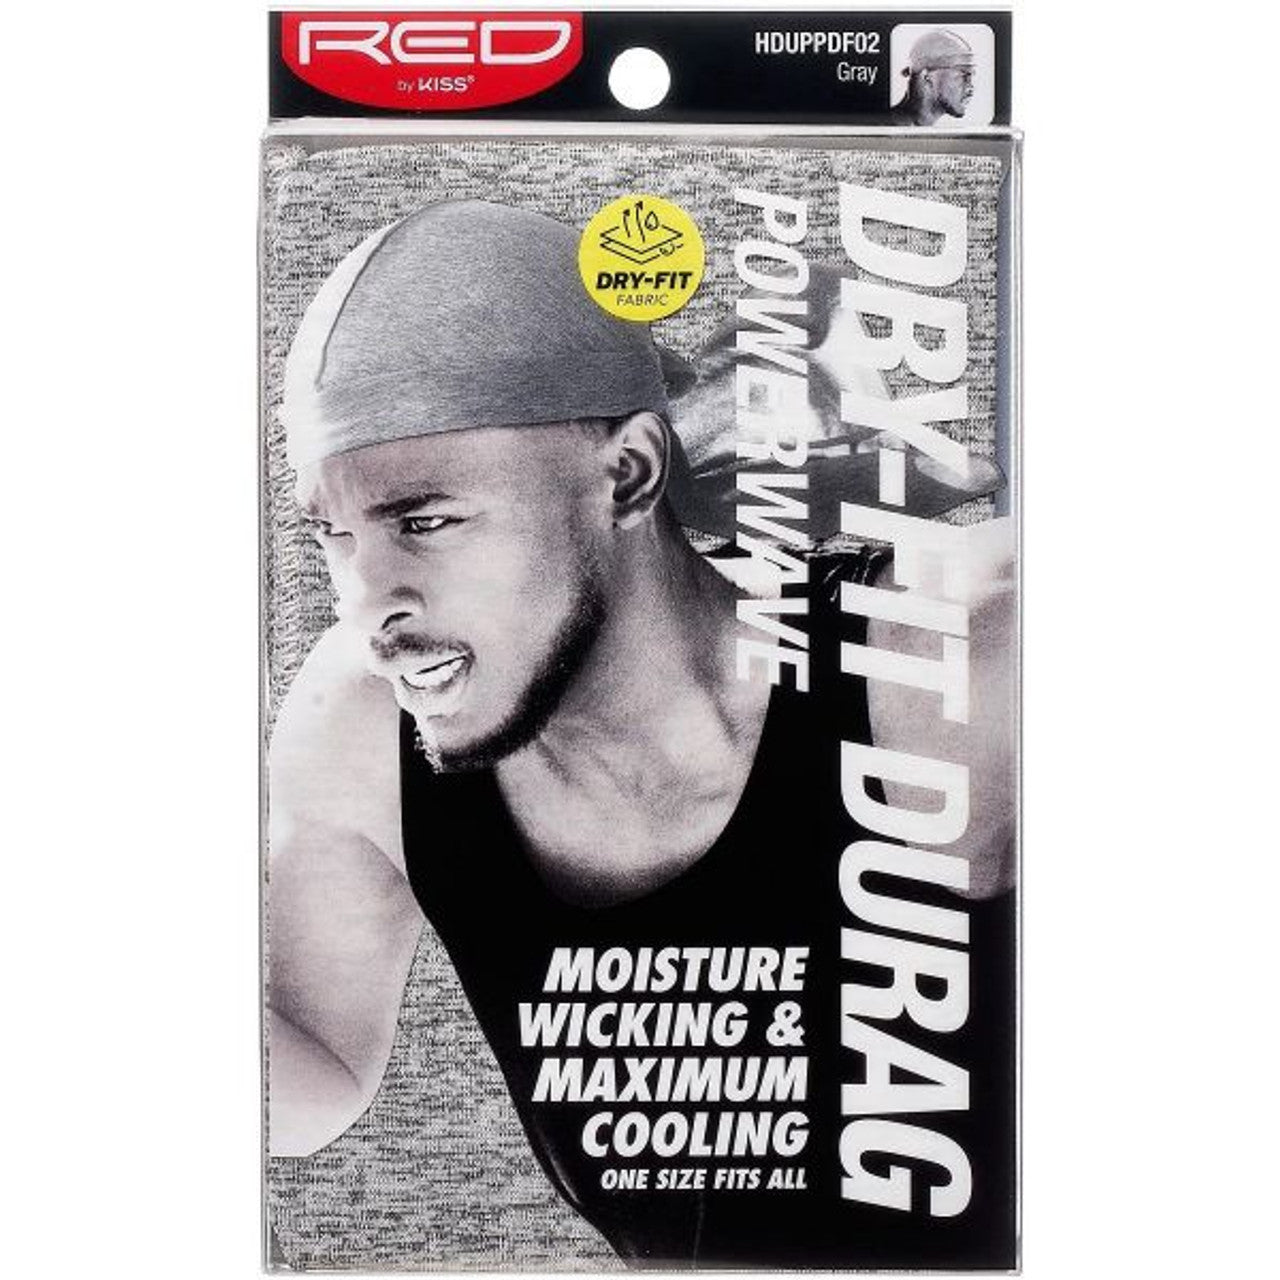 Red by Kiss Power Wave Dry Fit Durag - Gray - #HDUPPDF02